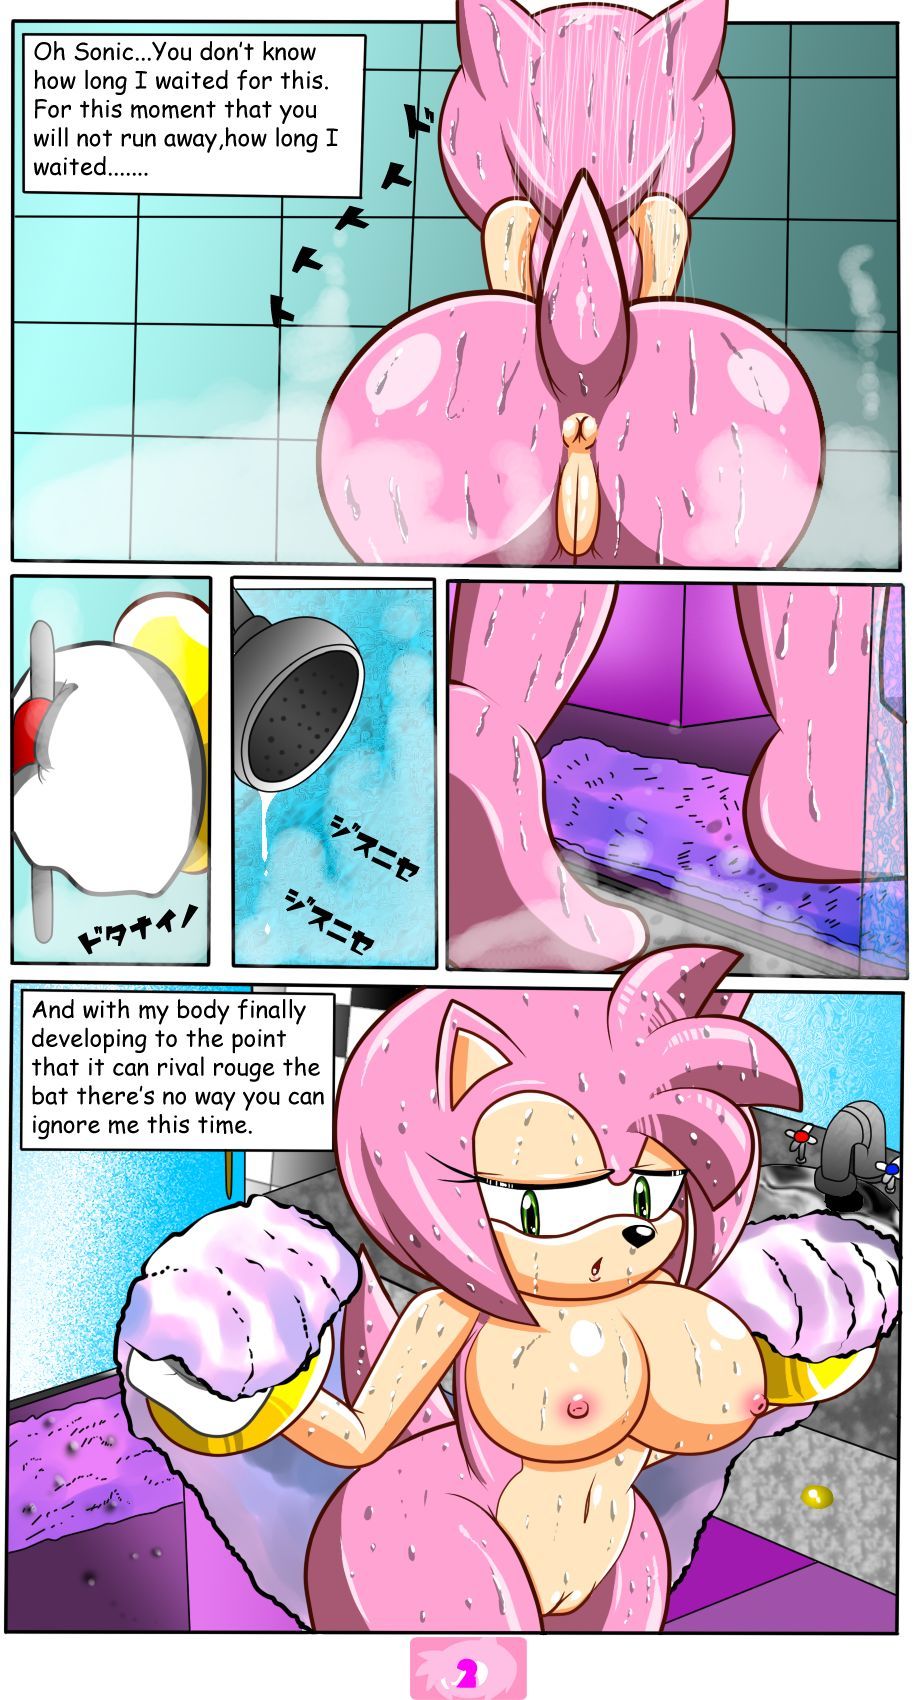 A Sweat Rose Sonic the Hedgehog by Nobody147 page 4